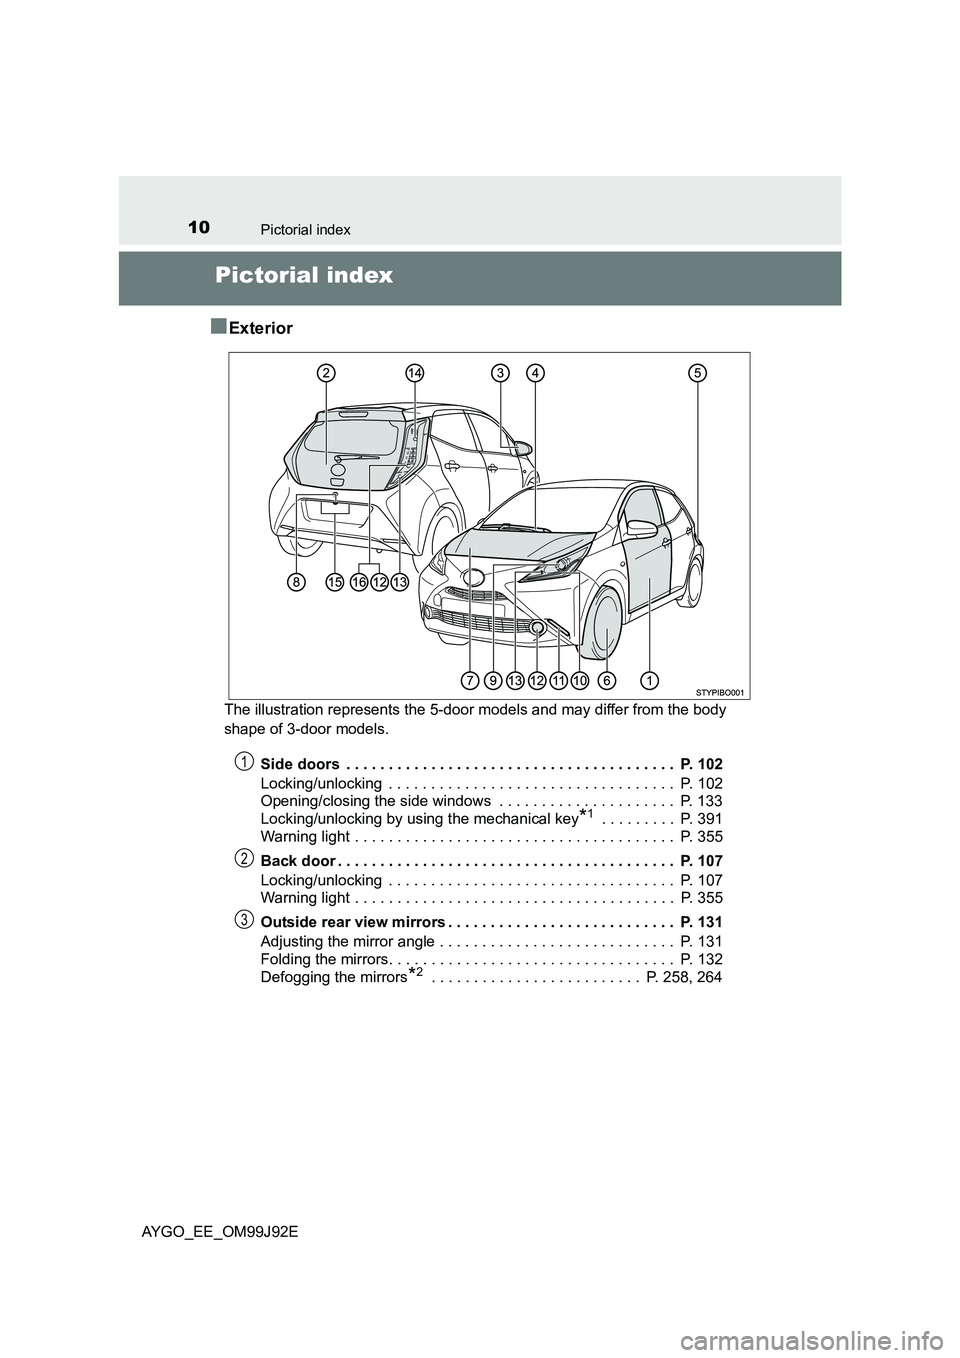 TOYOTA AYGO 2015  Owners Manual (in English) 10Pictorial index
AYGO_EE_OM99J92E
Pictorial index 
■Exterior
The illustration represents the 5-door  models and may differ from the body  
shape of 3-door models. 
Side doors  . . . . . . . . . . .